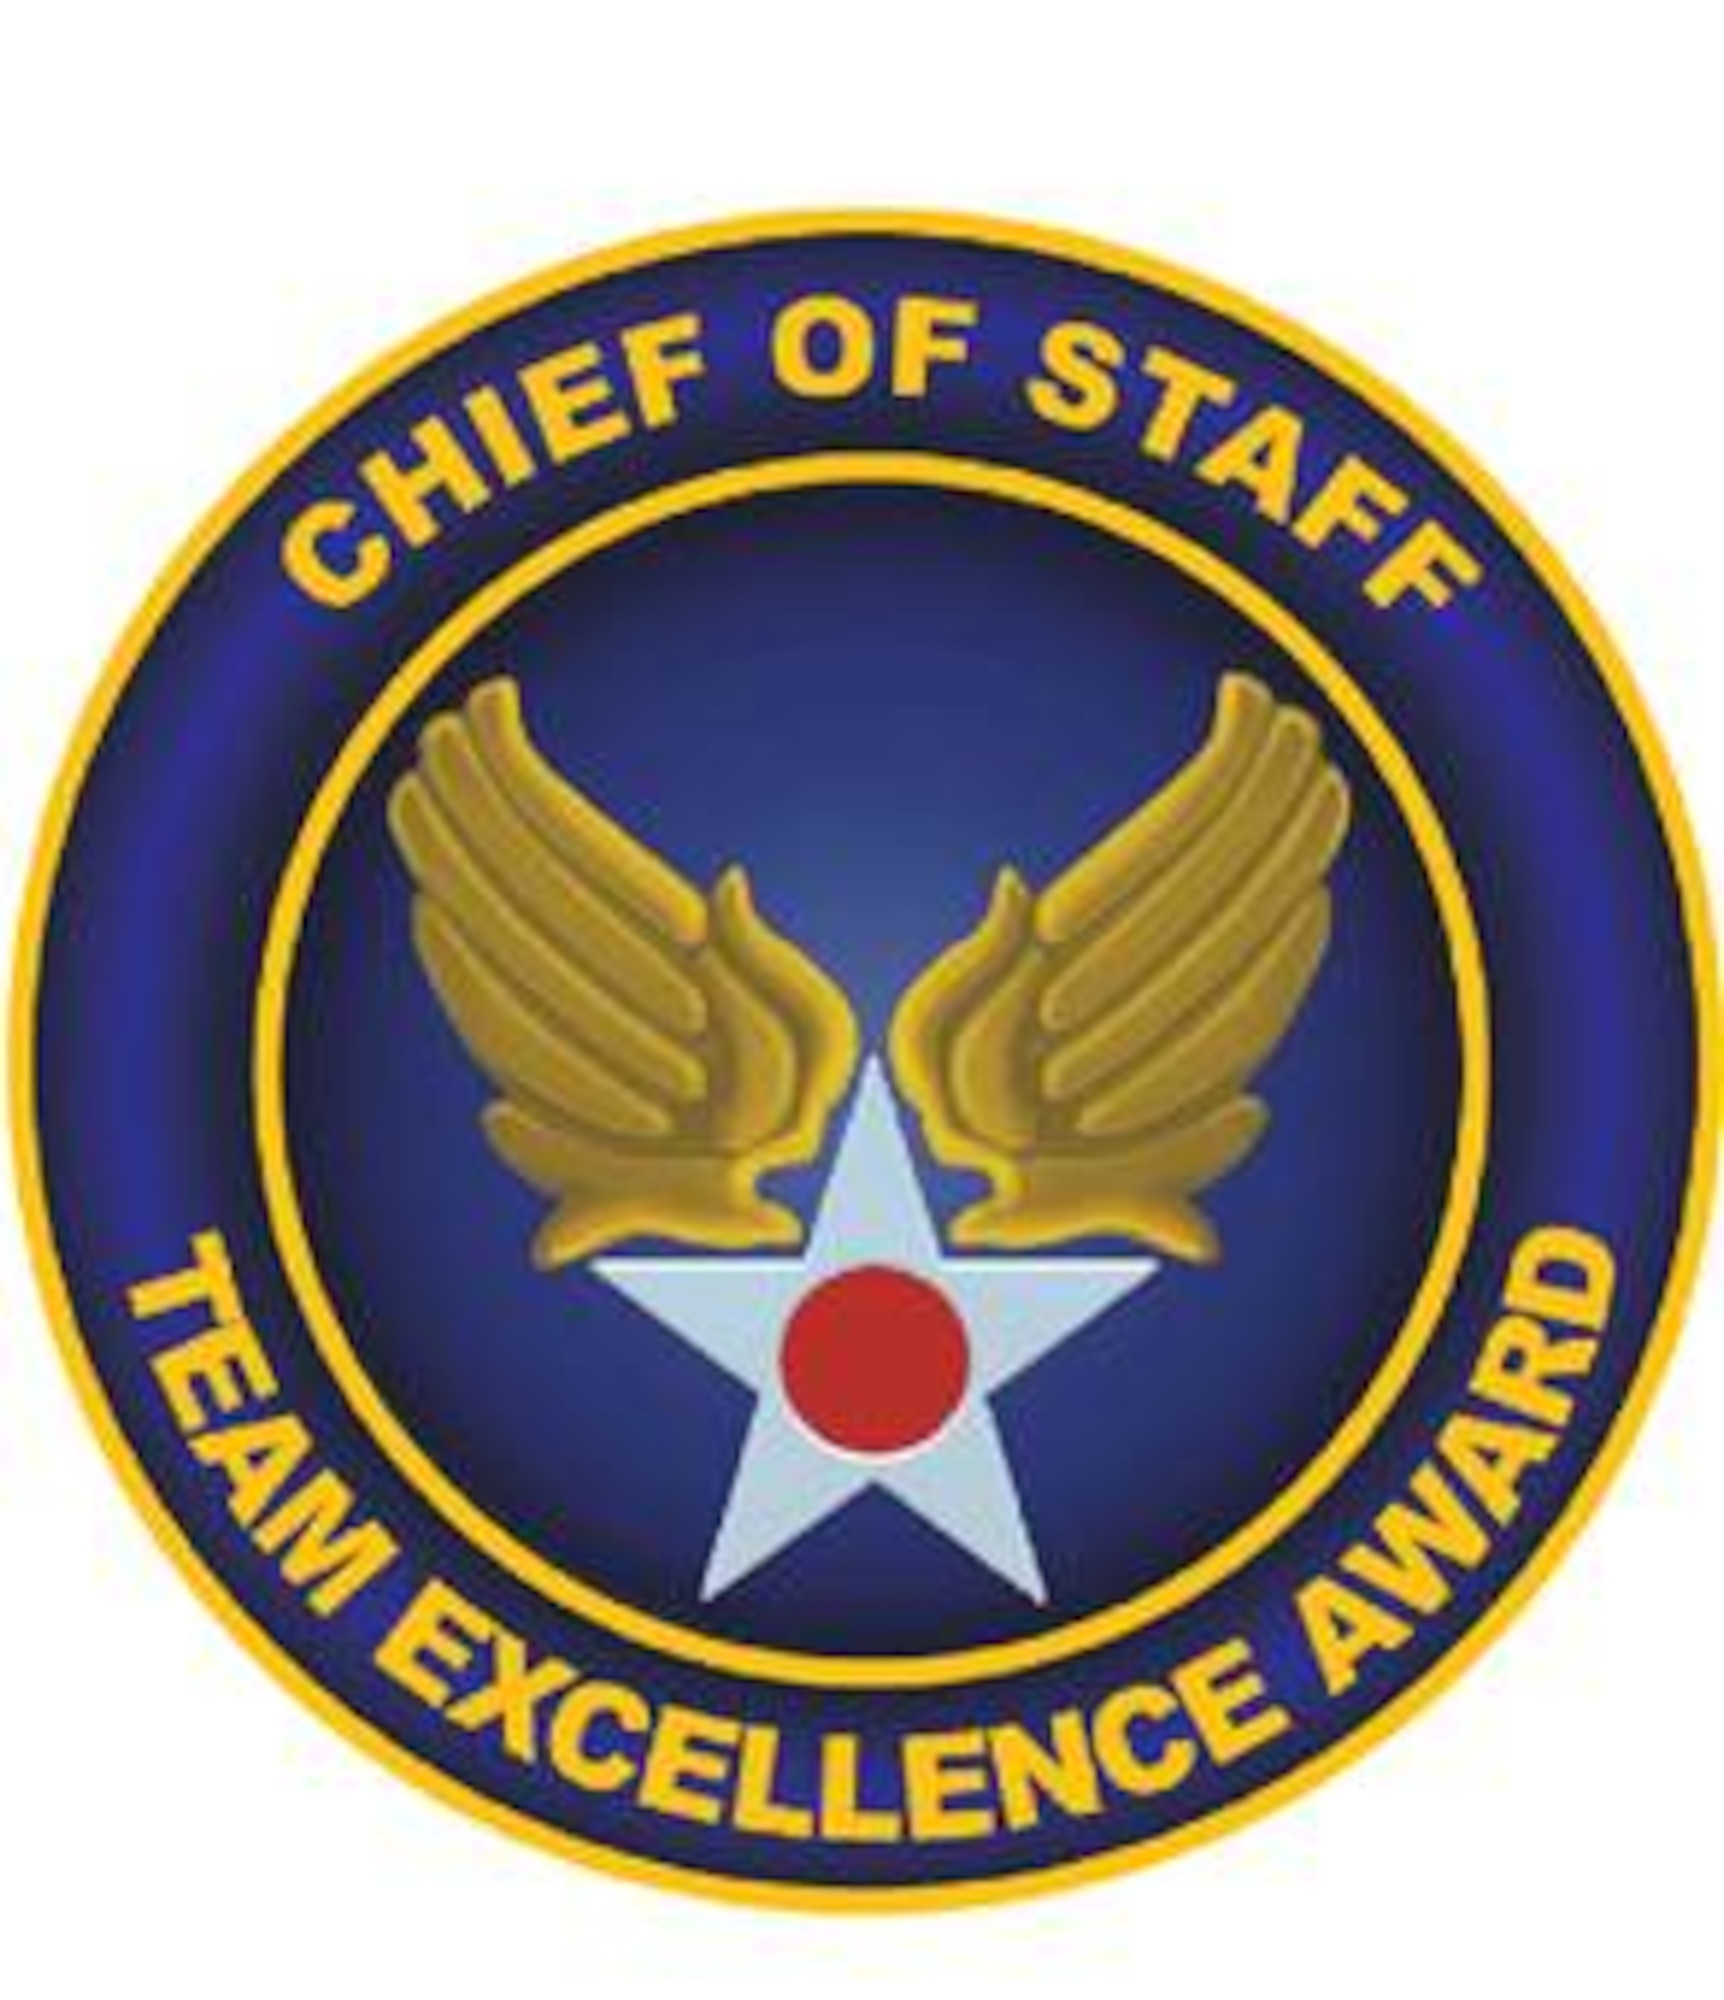 Chief of Staff Team Excellence Award logo (U.S. Air Force Illustration)